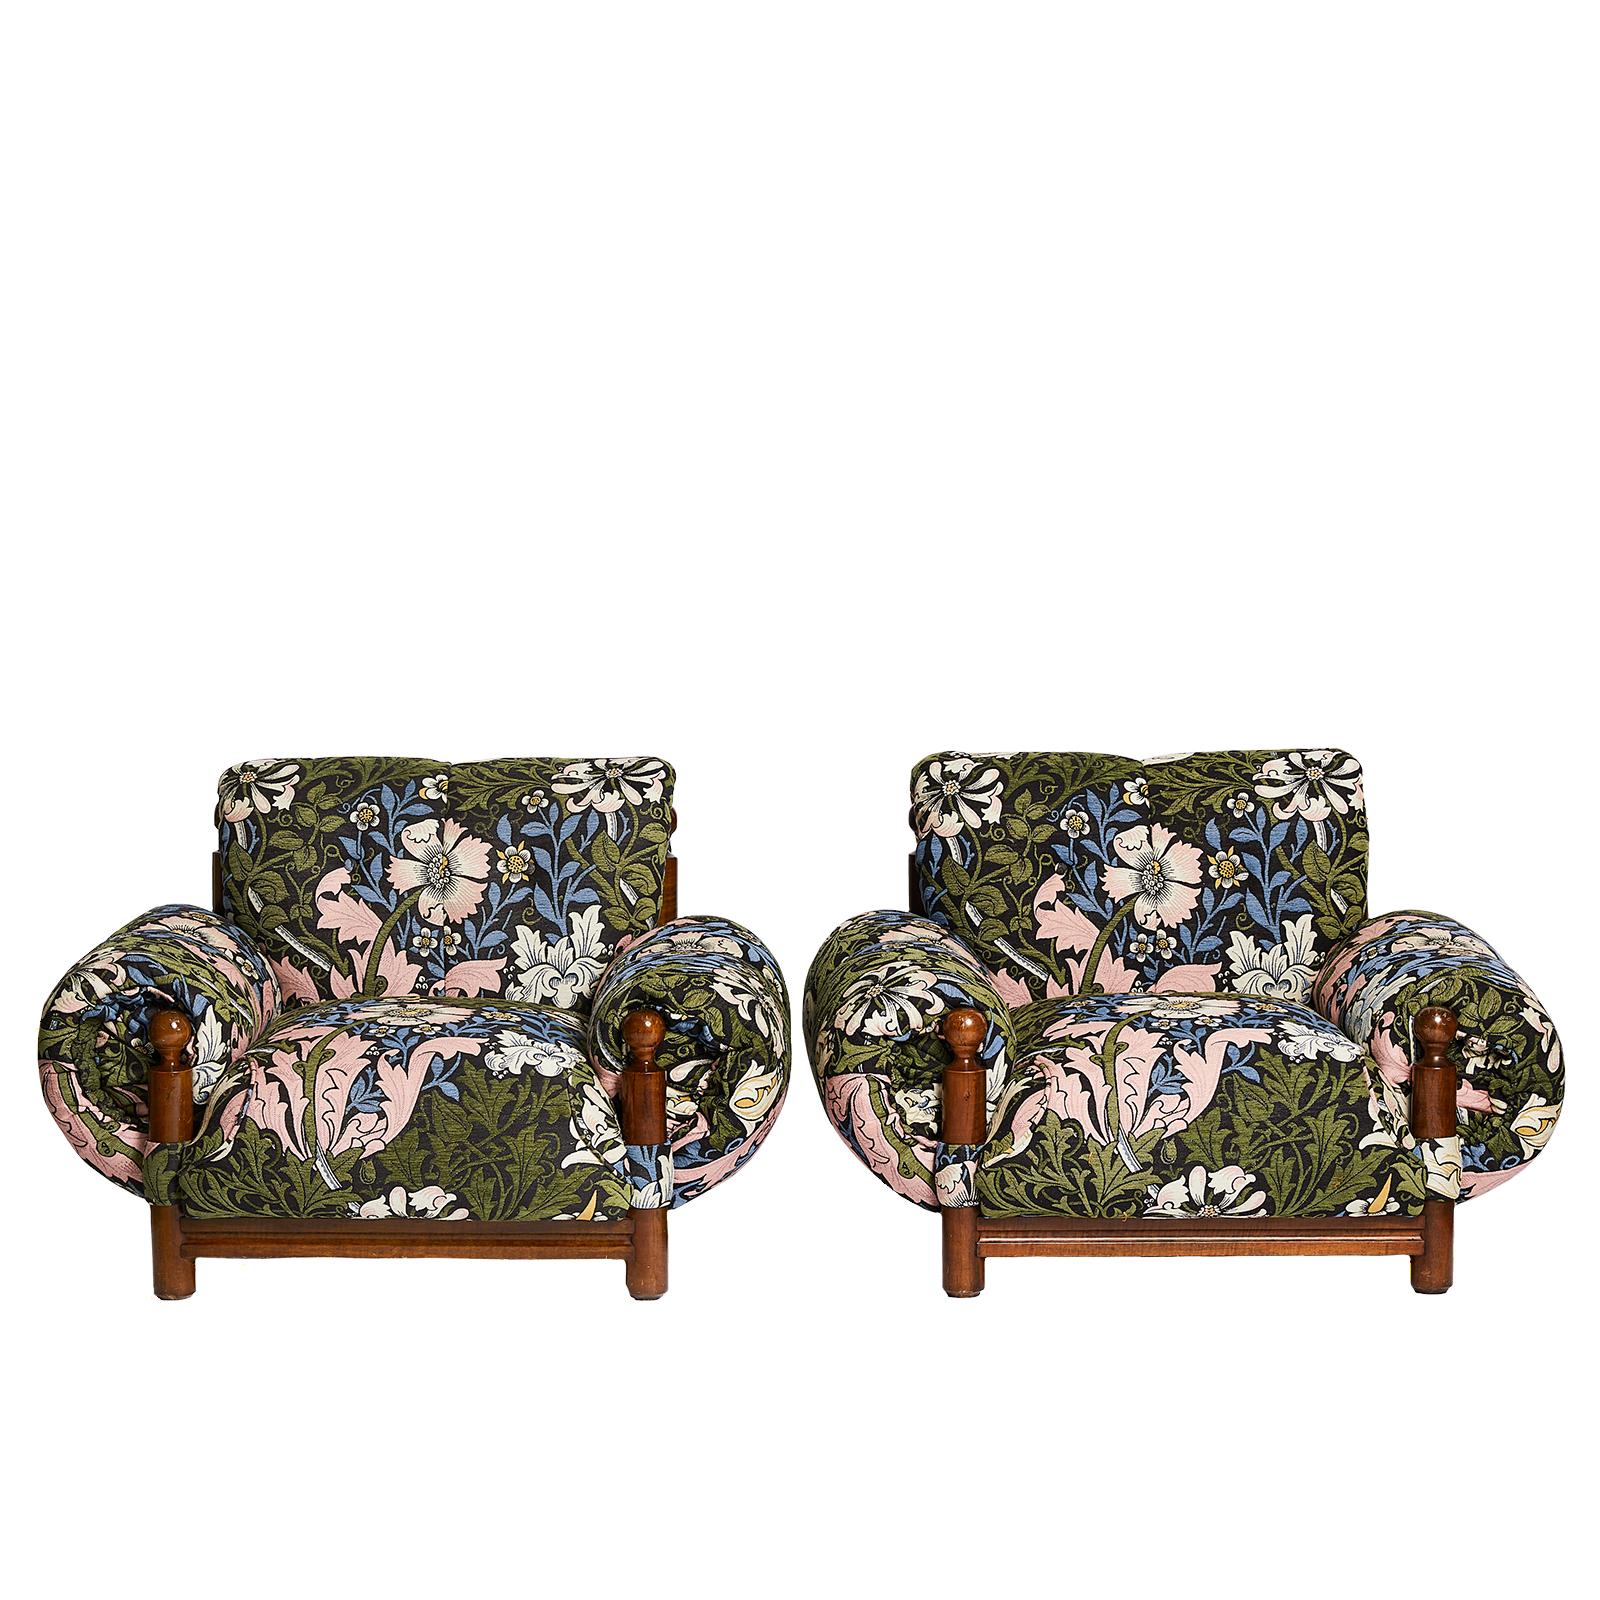 Relax in style with this classic pair of 1970s Italian lounge chairs, expertly upholstered in House of Hackney’s COMPTON jacquard fabric, a reworking of William Morris’ iconic print, reimagined in bold blacks, blues and greens.

A boldly beautiful